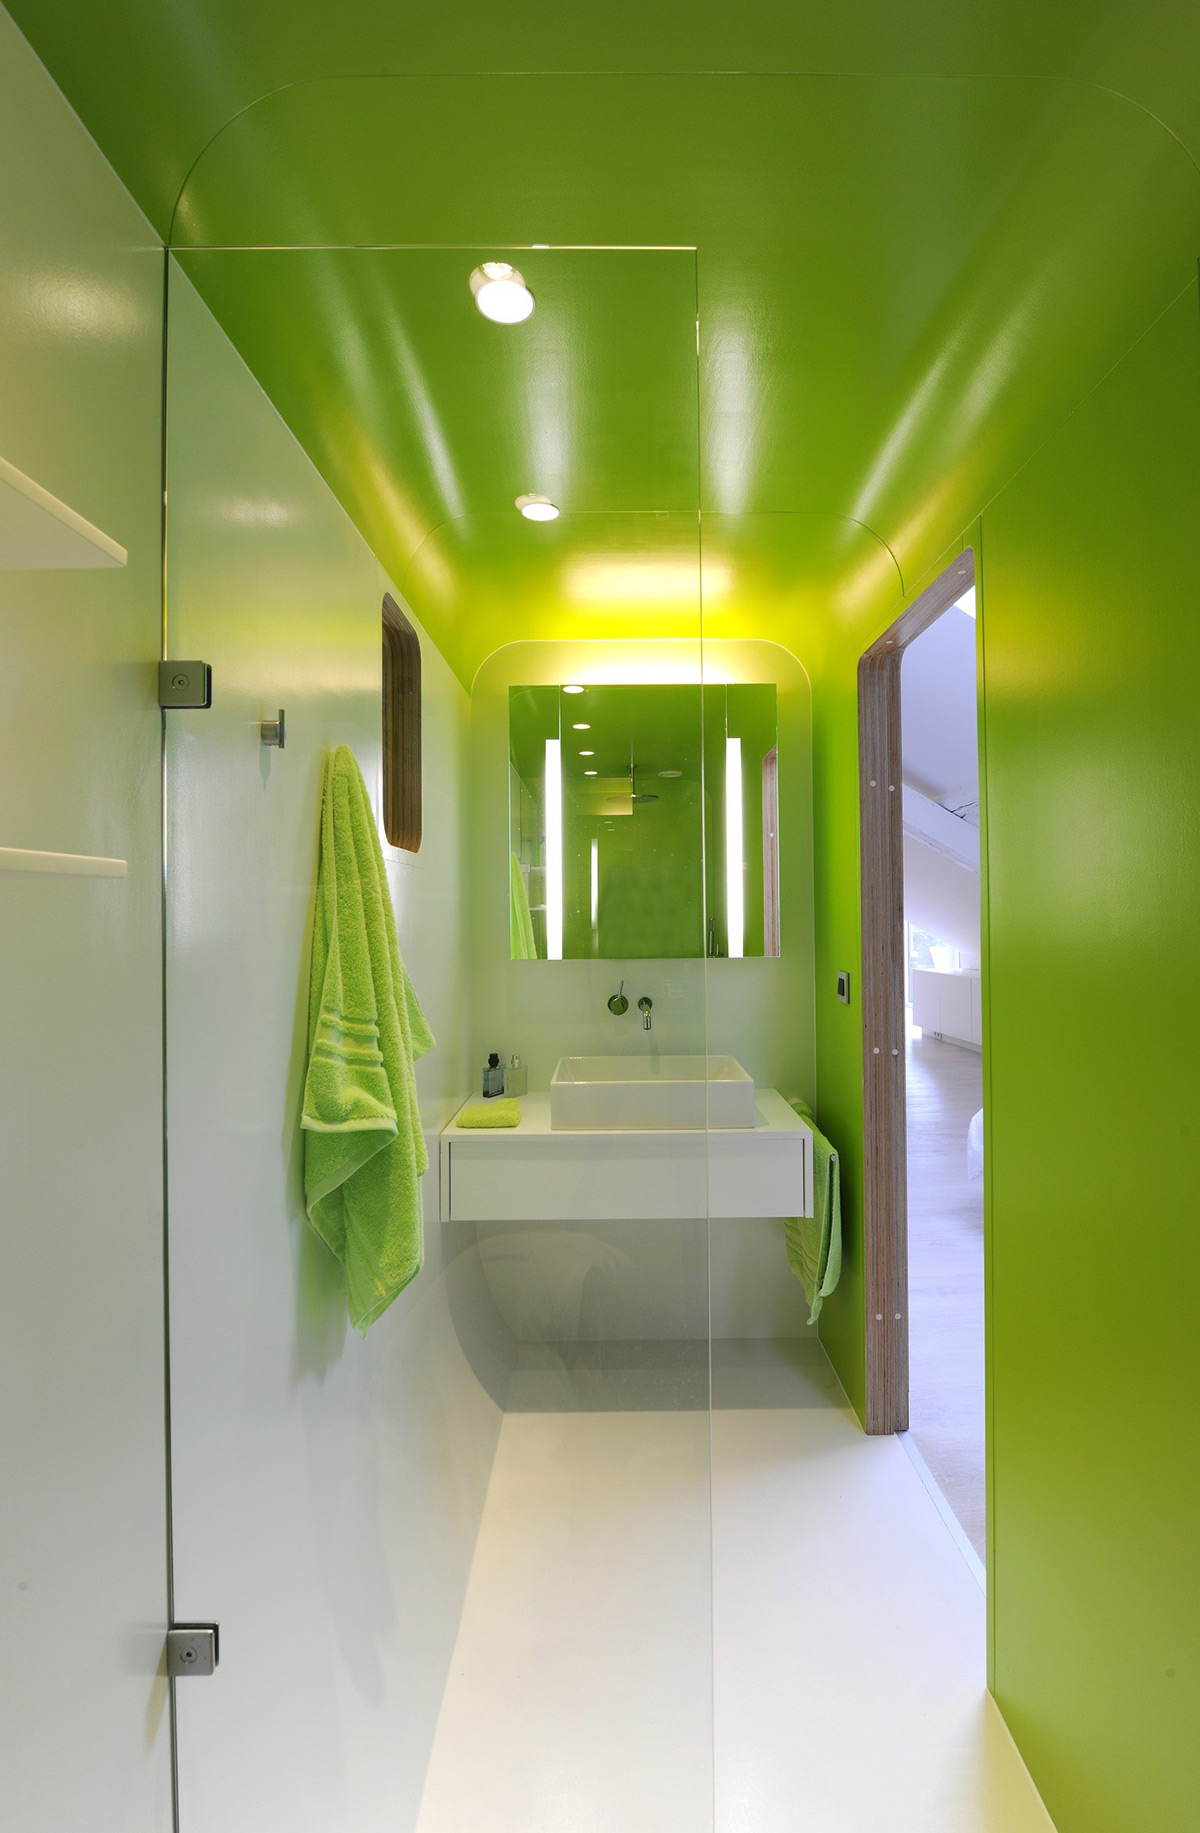 This bright green bathroom design incorporates a curved ceiling profile, turning the narrow room proportions into a positive feature.